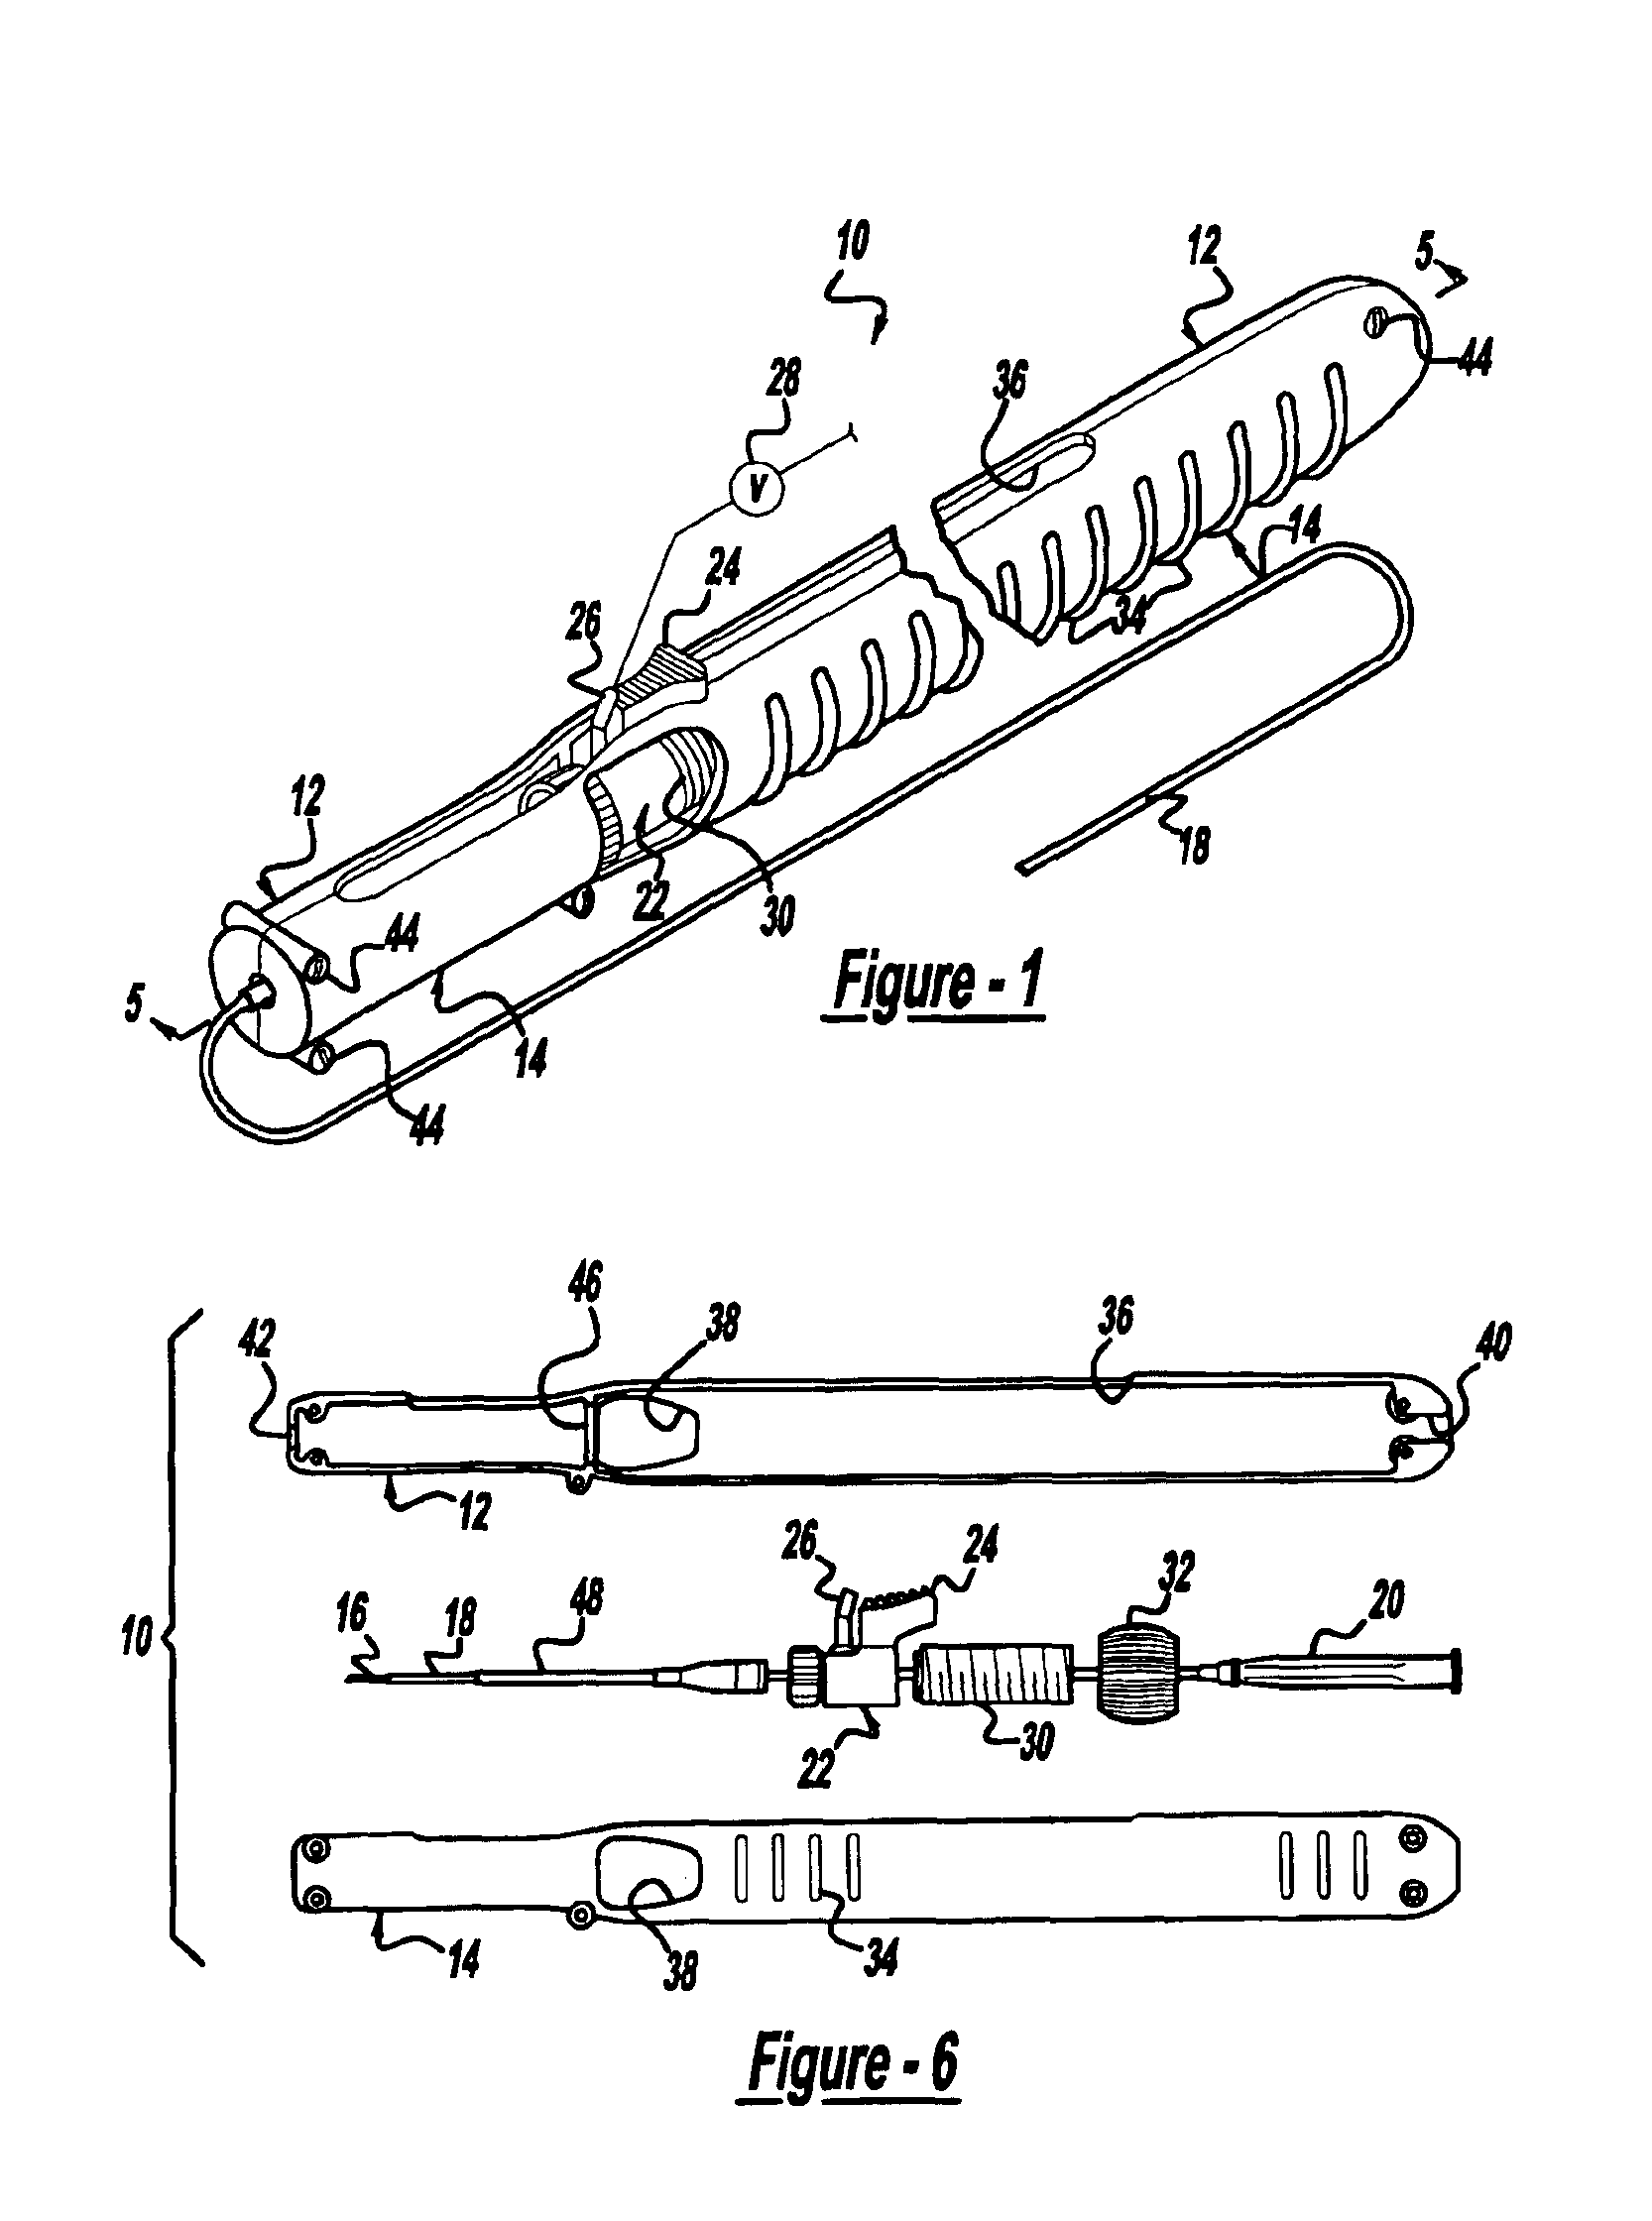 Handle deployment mechanism for medical device and method